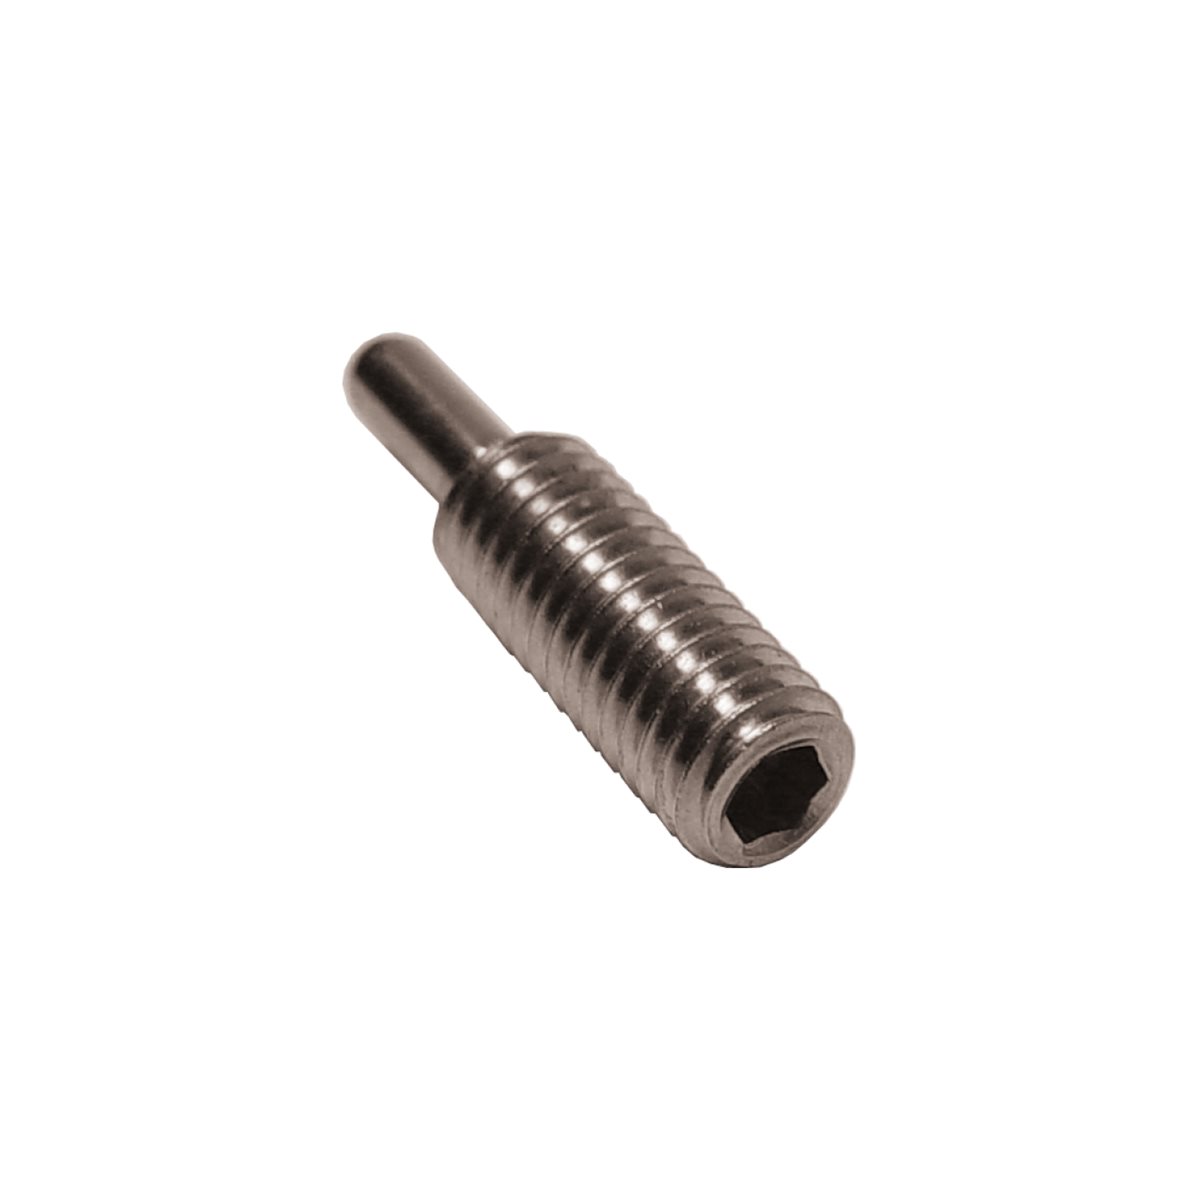 replacement pin for chain rivet extractor pliers